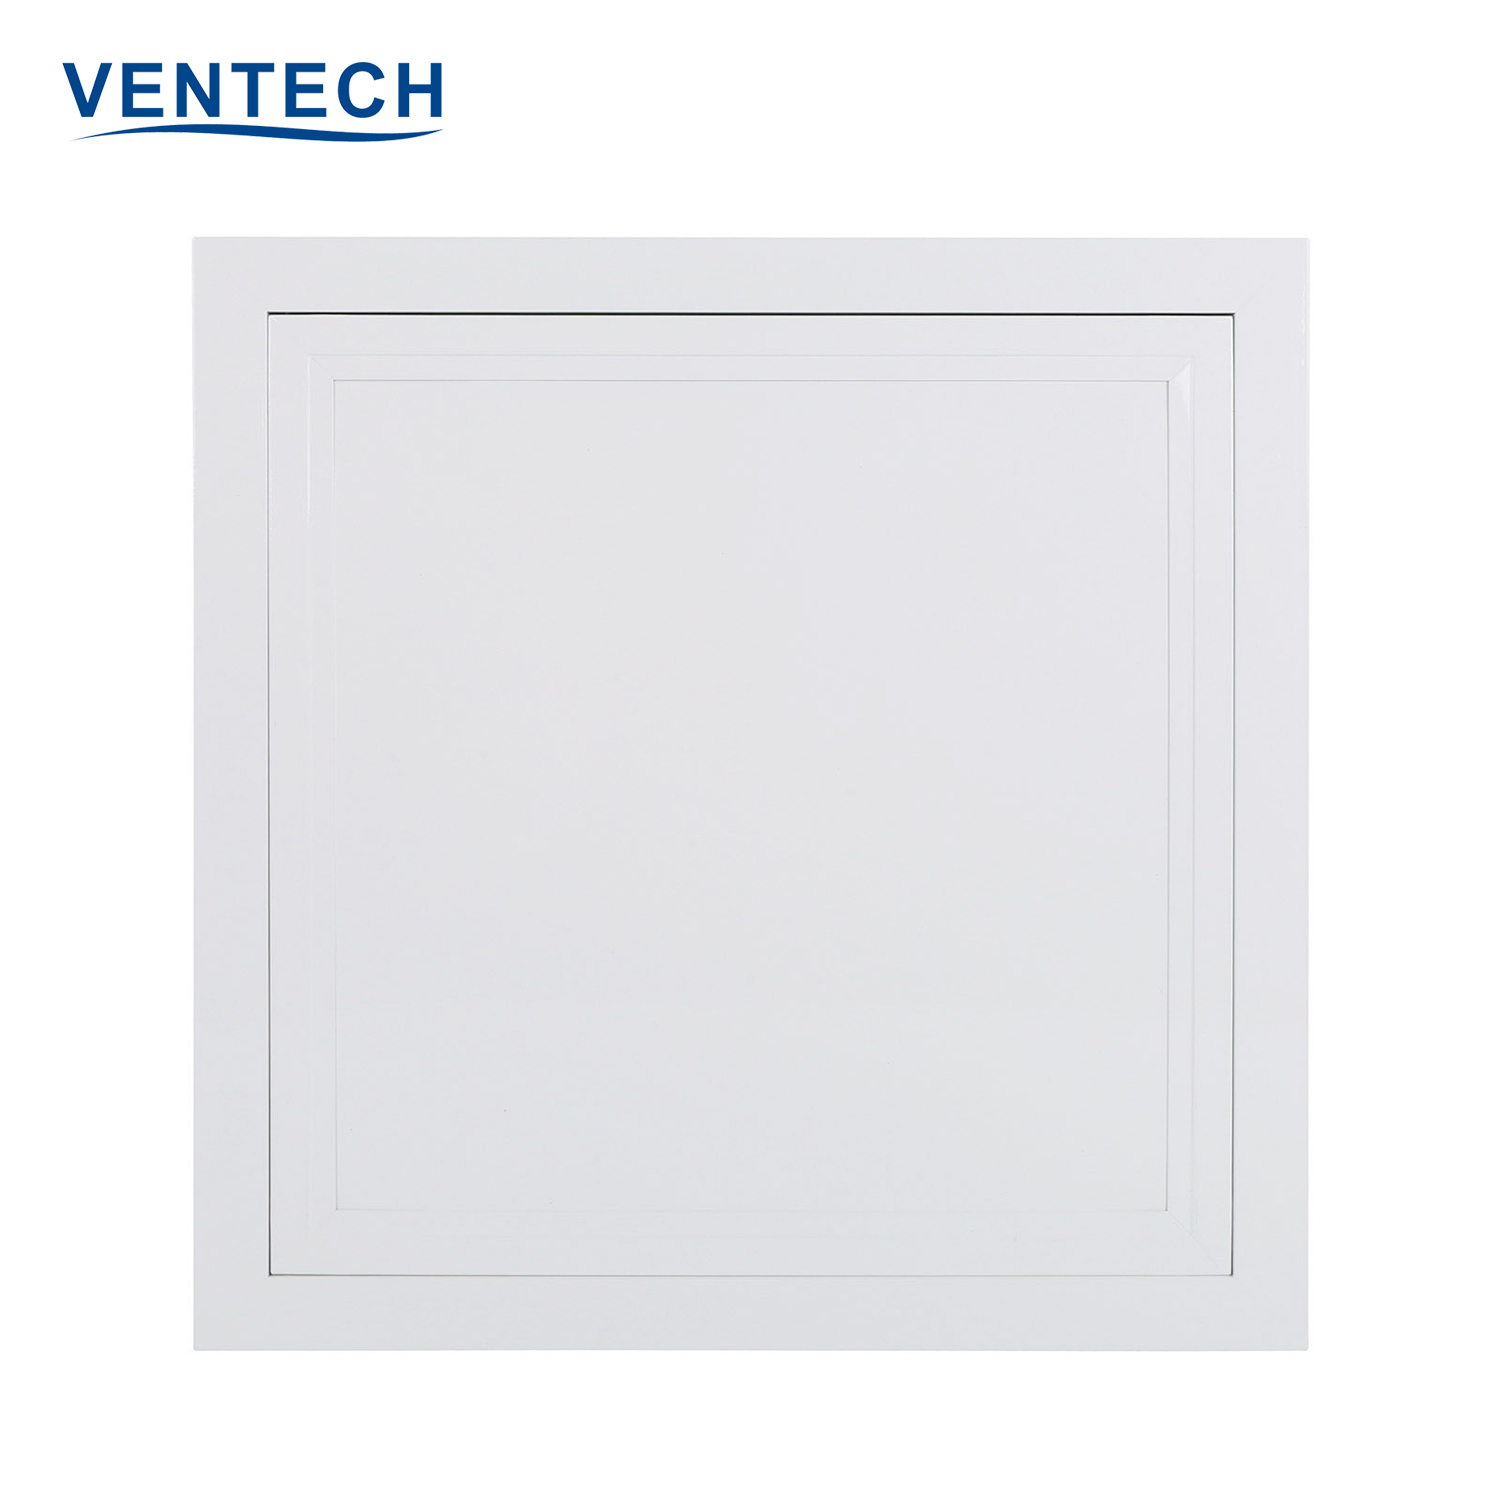 Ventech hvac access panel supply for promotion-1